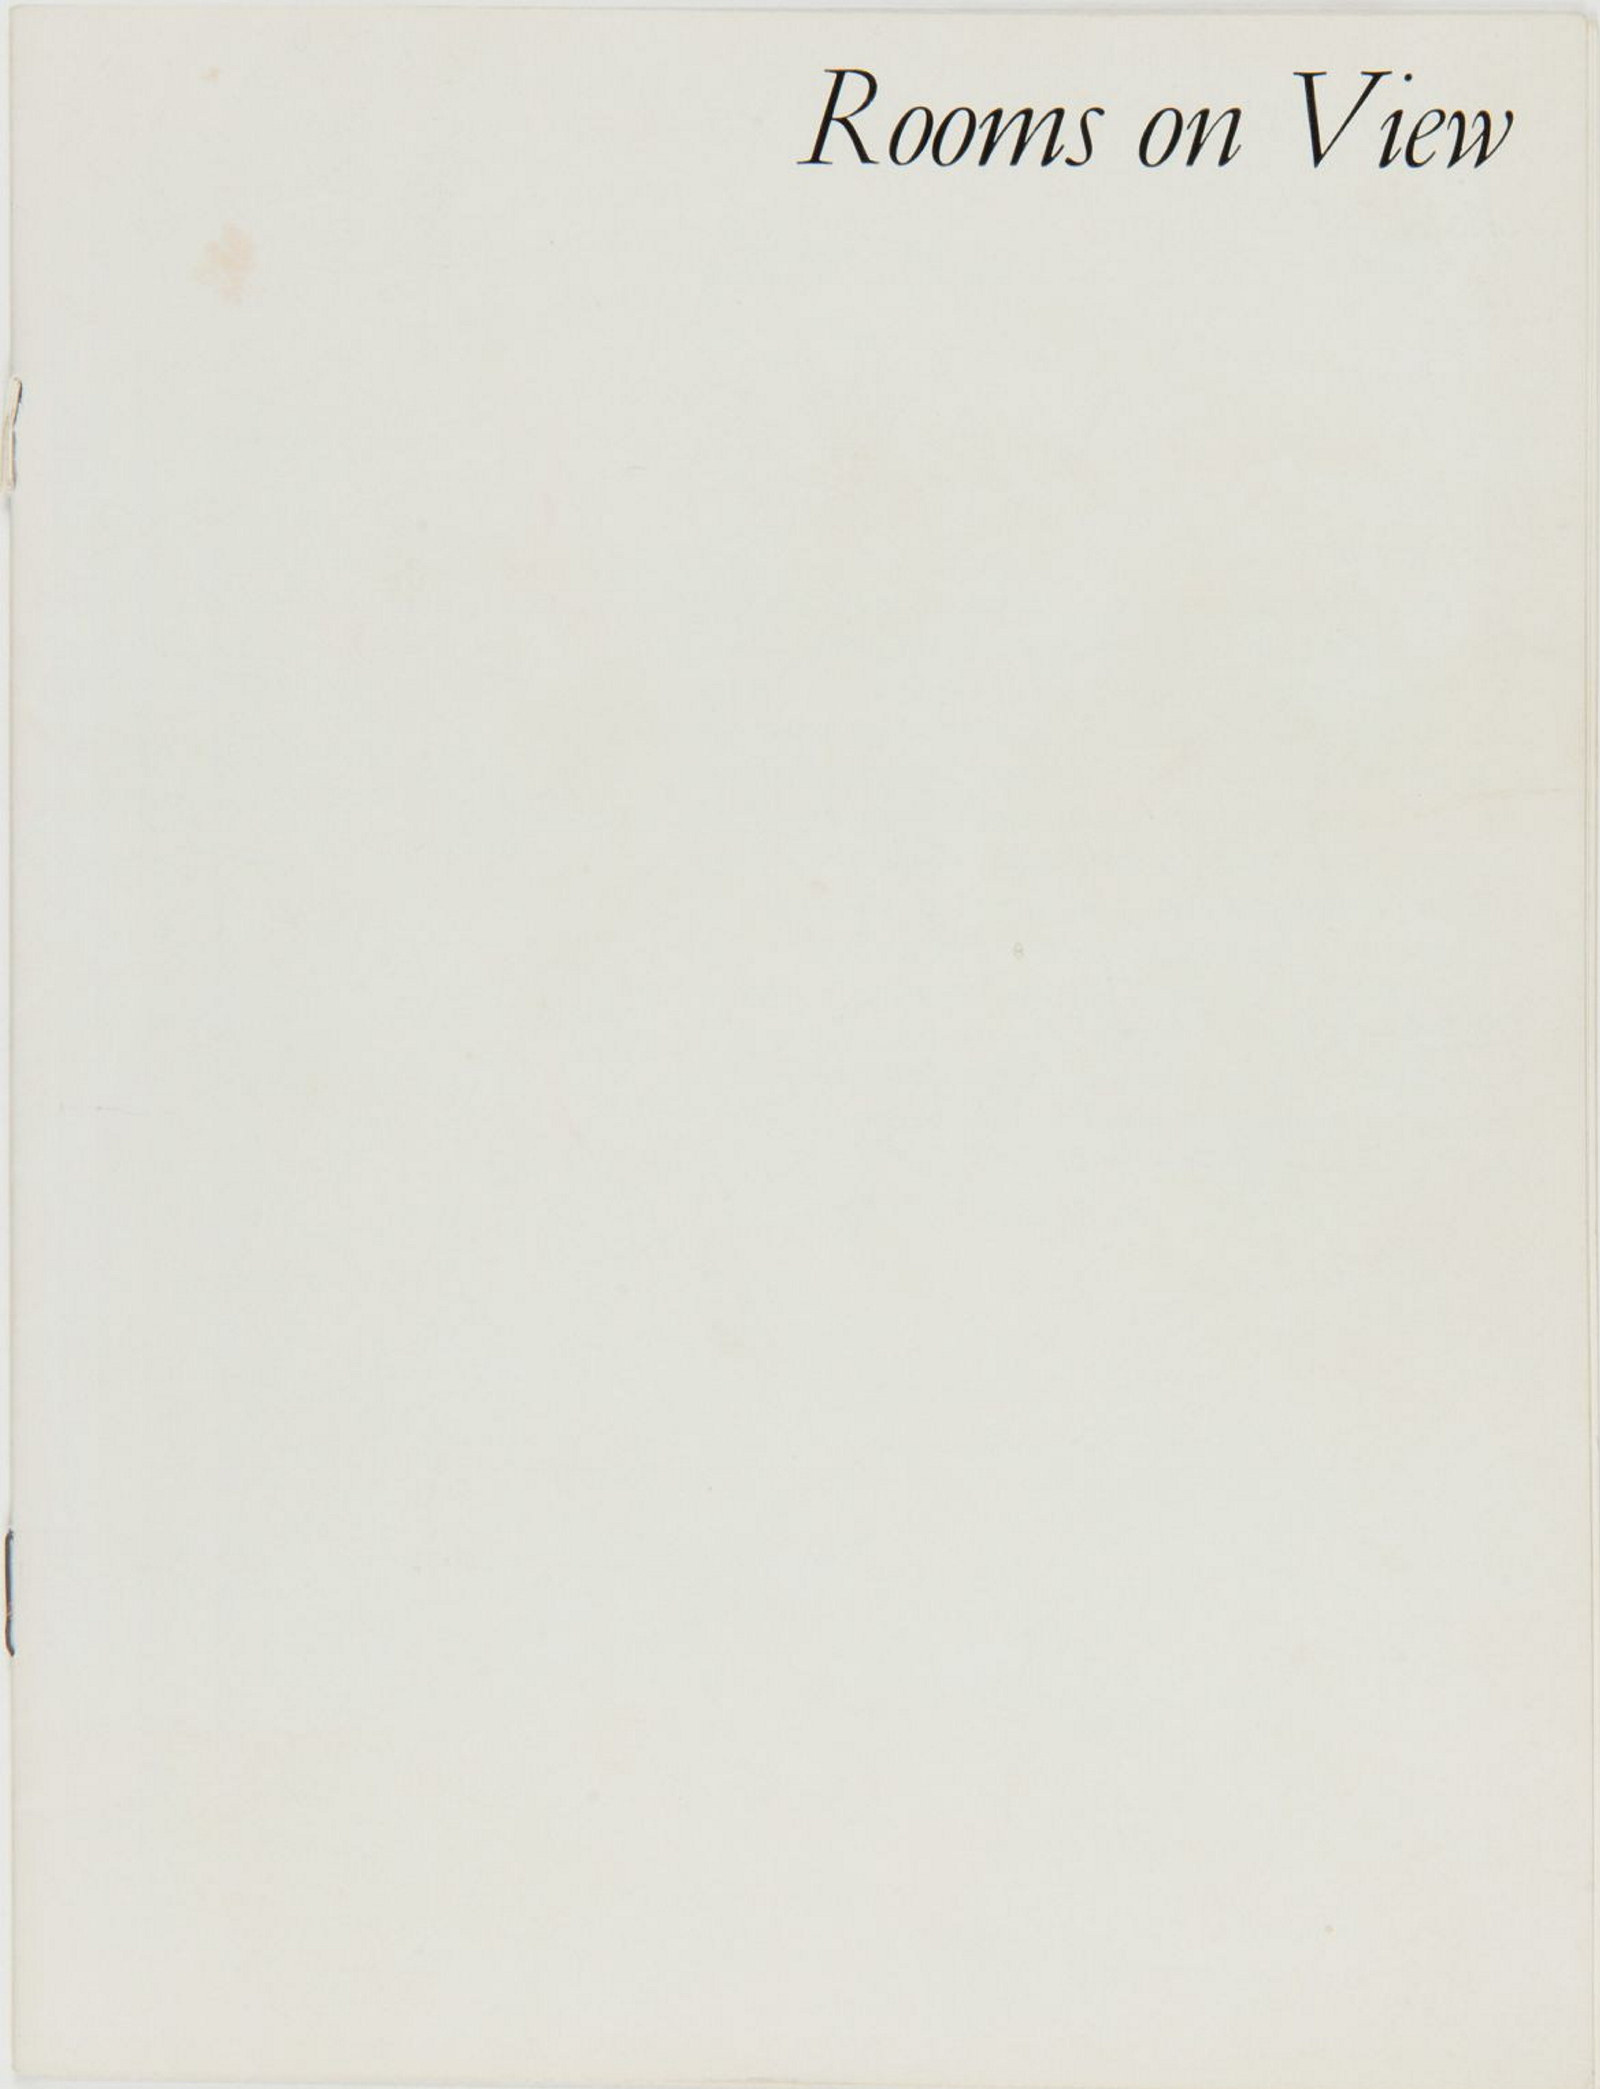 Cover of brochure for  ‘Rooms on View’ exhibition held at the Daily Telegraph building in Sydney in October 1967